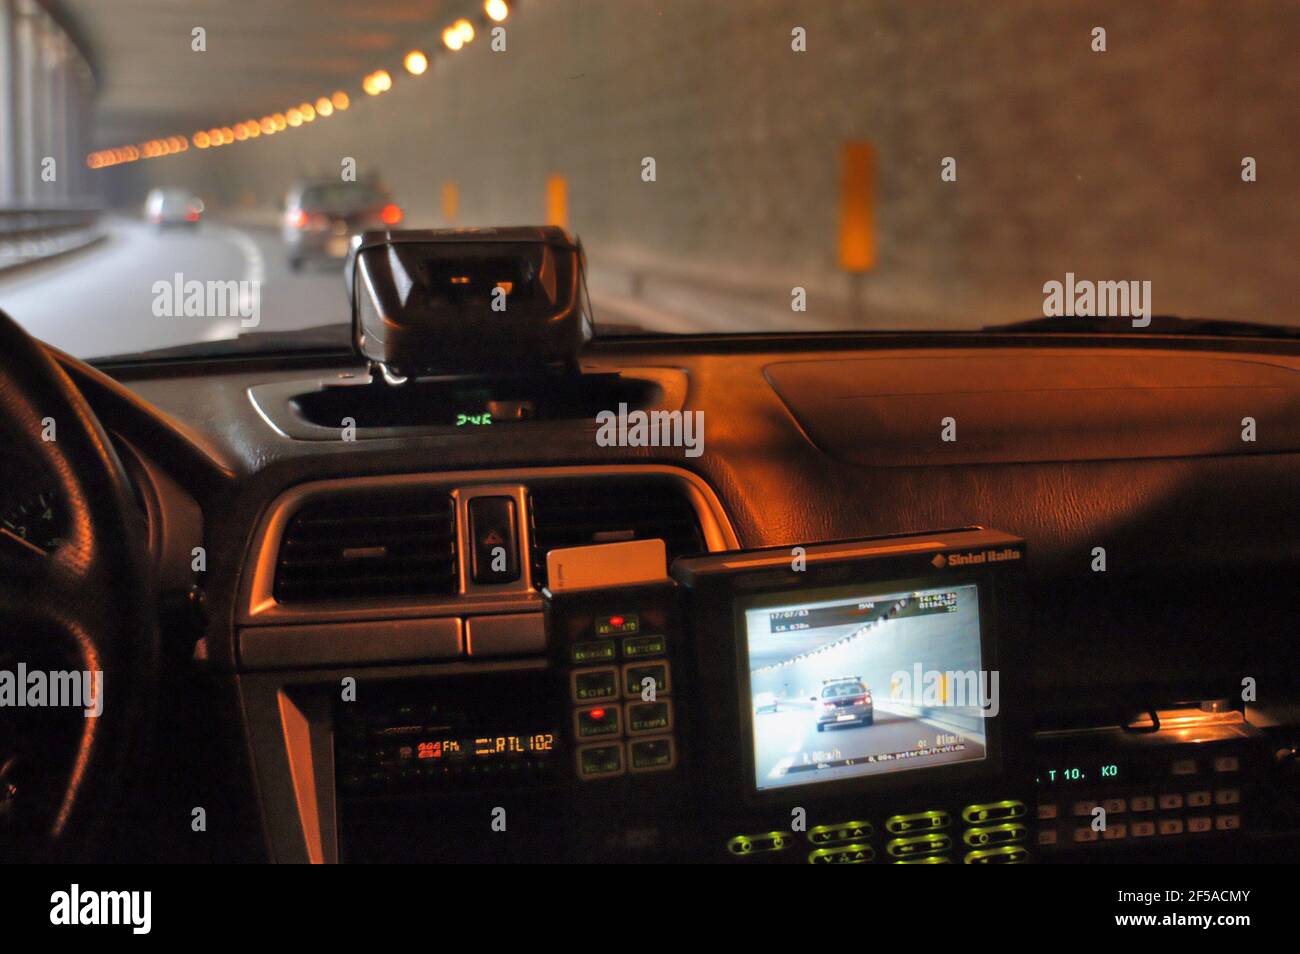 Iyaly, Provida speed limit control system mounted on a traffic police car Stock Photo